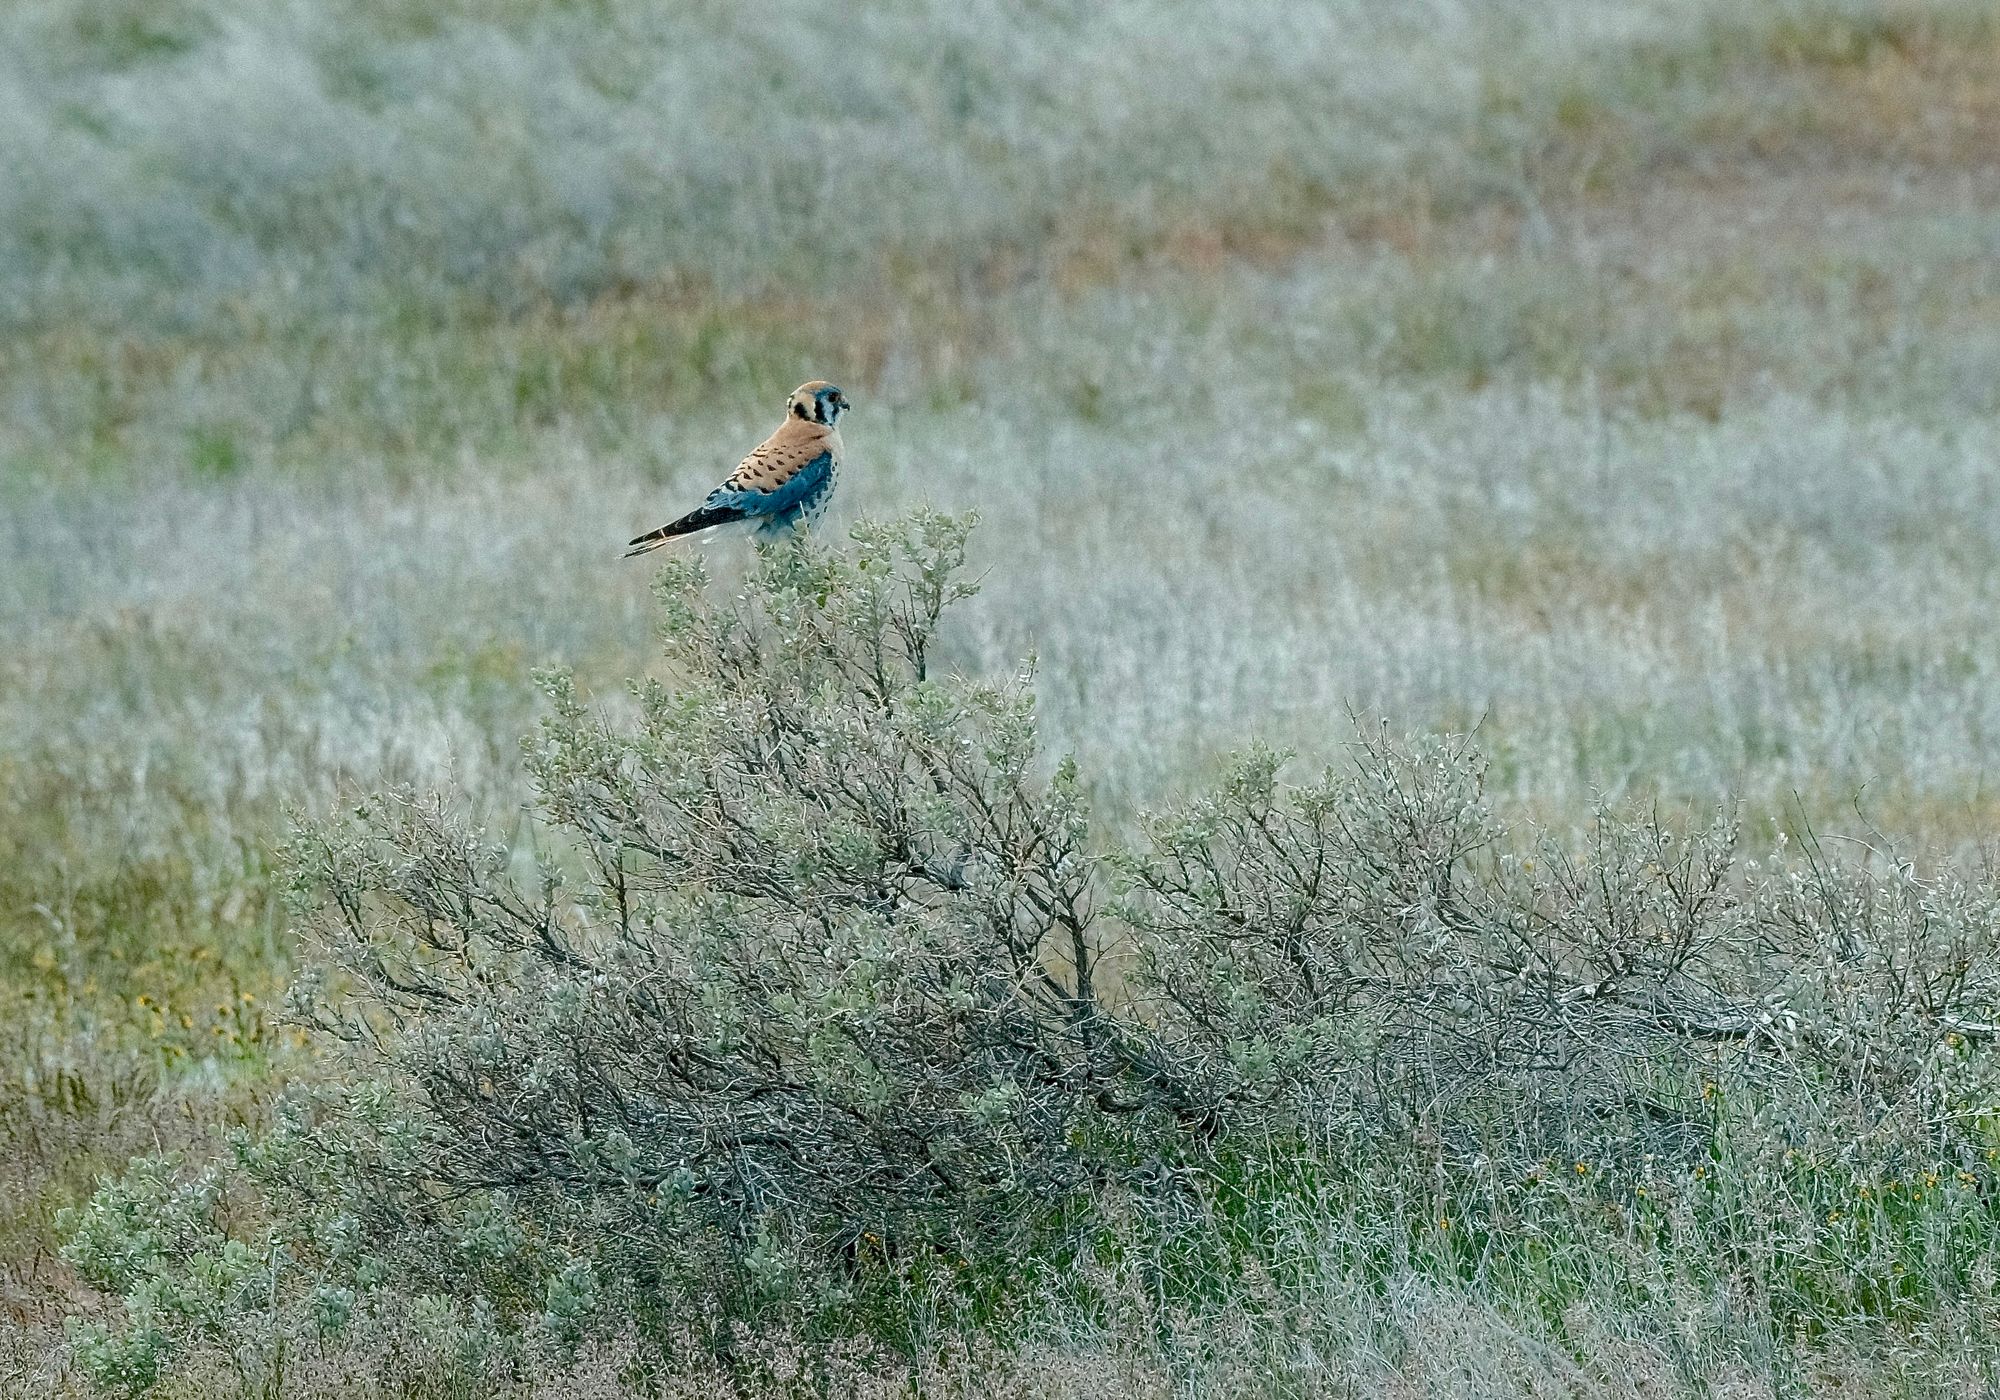 Male American Kestral falcon sits atop tall sage brush looking away and to his left, background is blurry dry grasses. Spotted in the Painted Hills Monument area in Oregon.